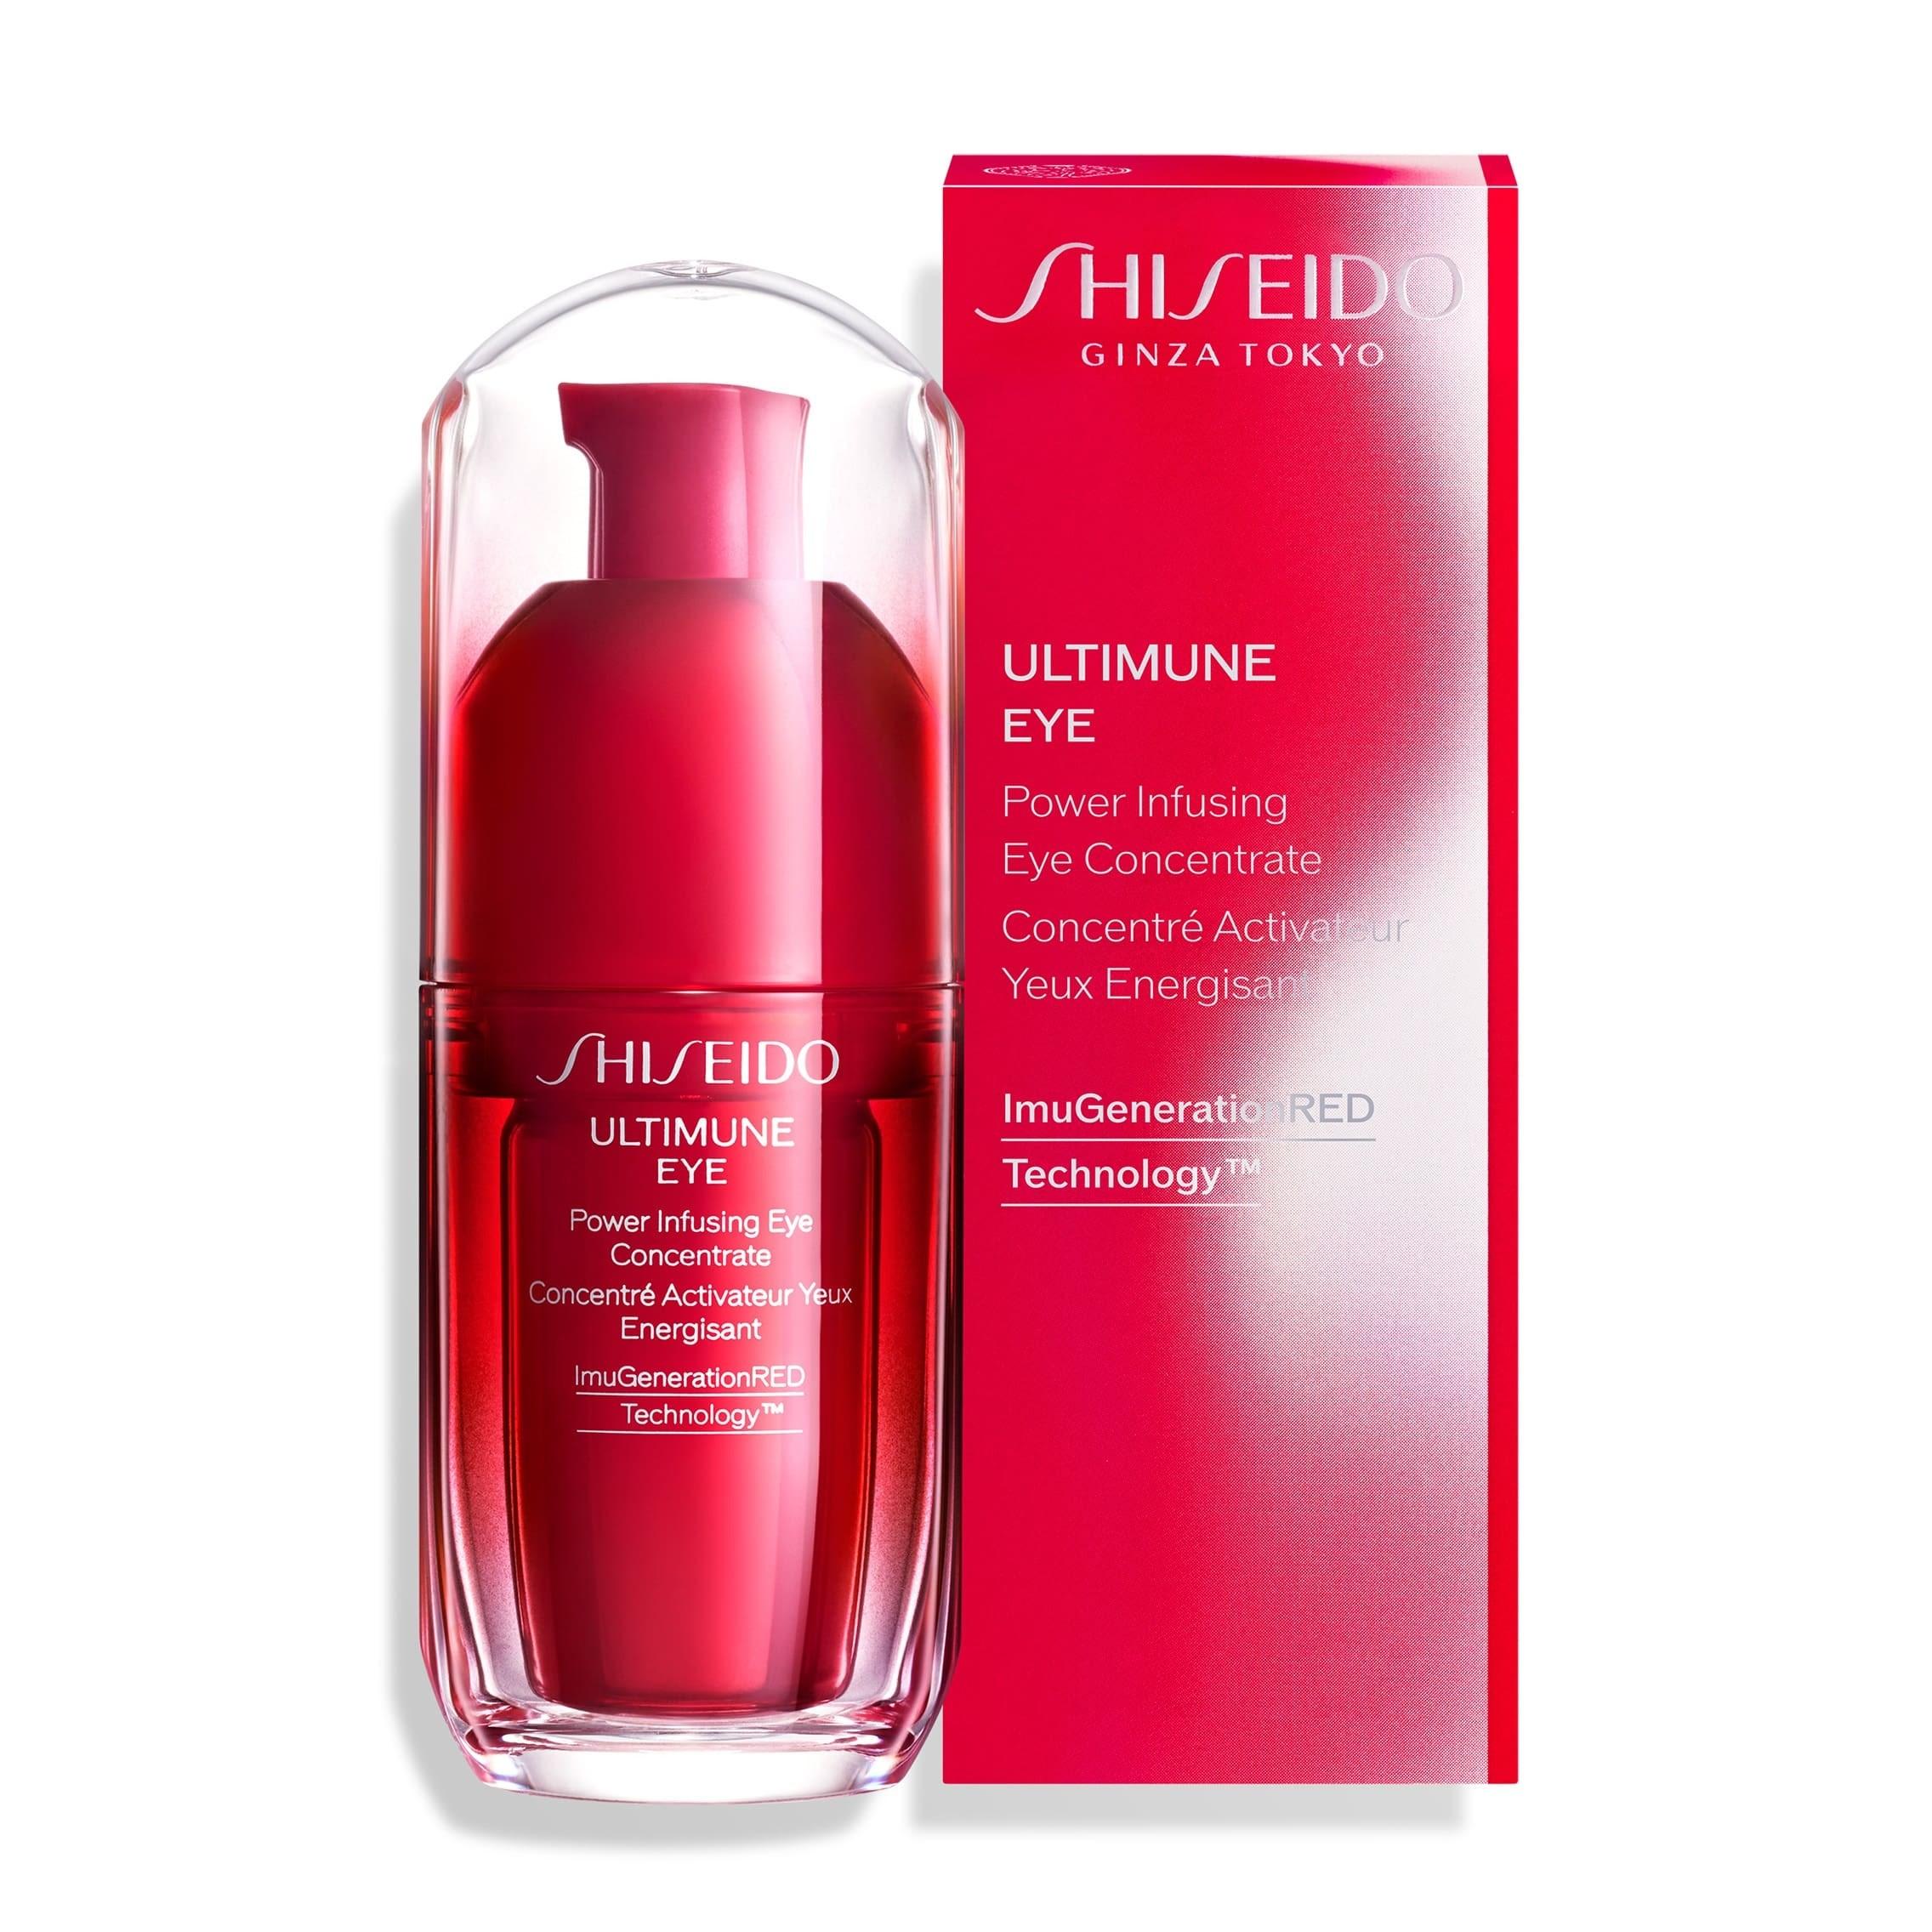 ULTIMUNE POWER INFUSING EYE CONCENTRATE 5